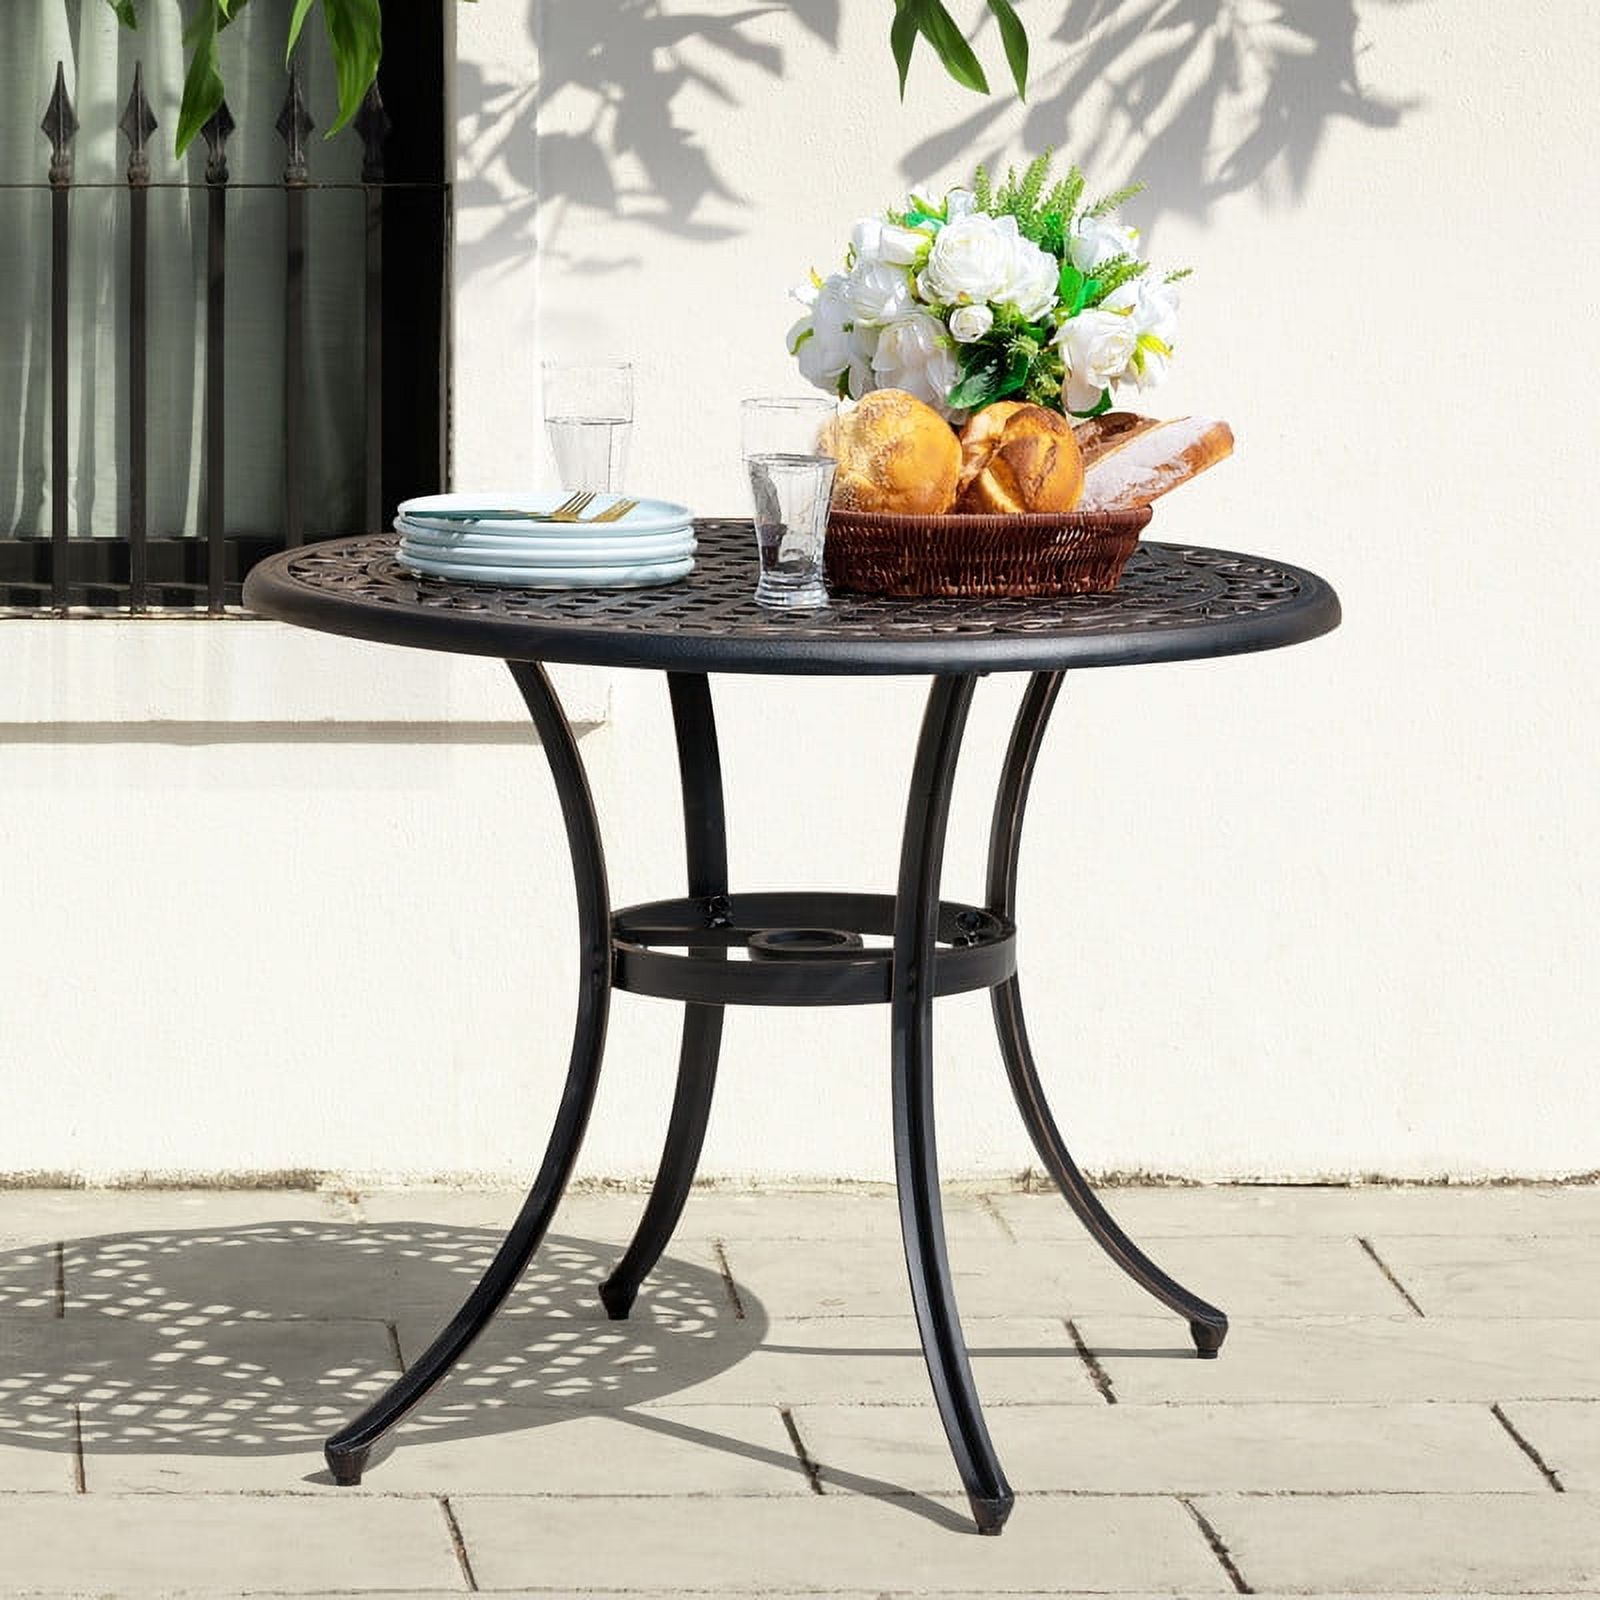 Nuu Garden 36" Cast Aluminum Outdoor Dining Table Round Patio Bistro Dining Table with Umbrella Hole,Black with Antique Bronze at The Edge - image 4 of 9